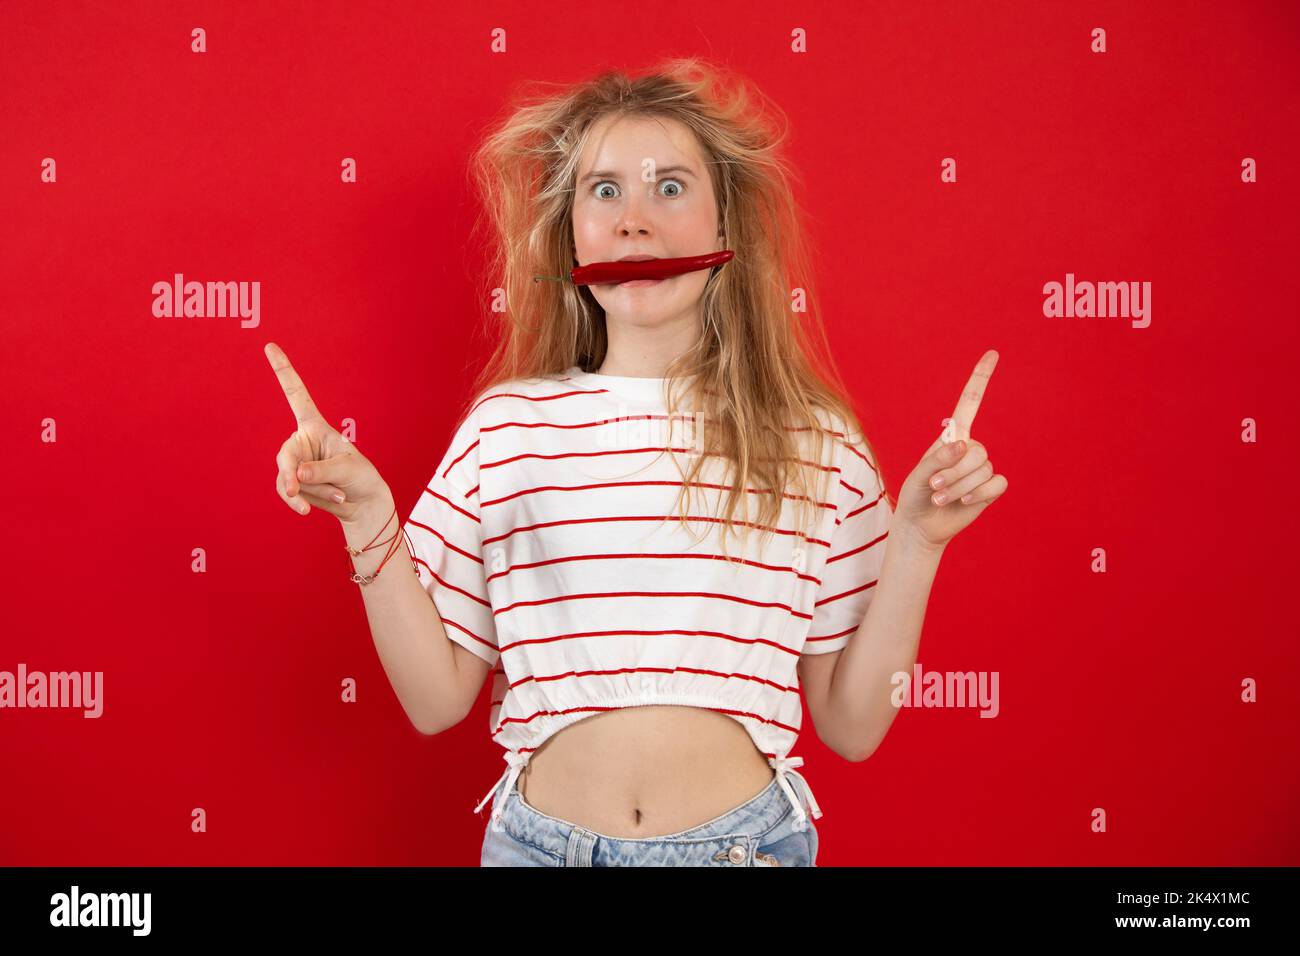 Portrait of astonished teenage girl with disheveled fair hair raising hands with fingers up keeping in mouth red chilli. Stock Photo